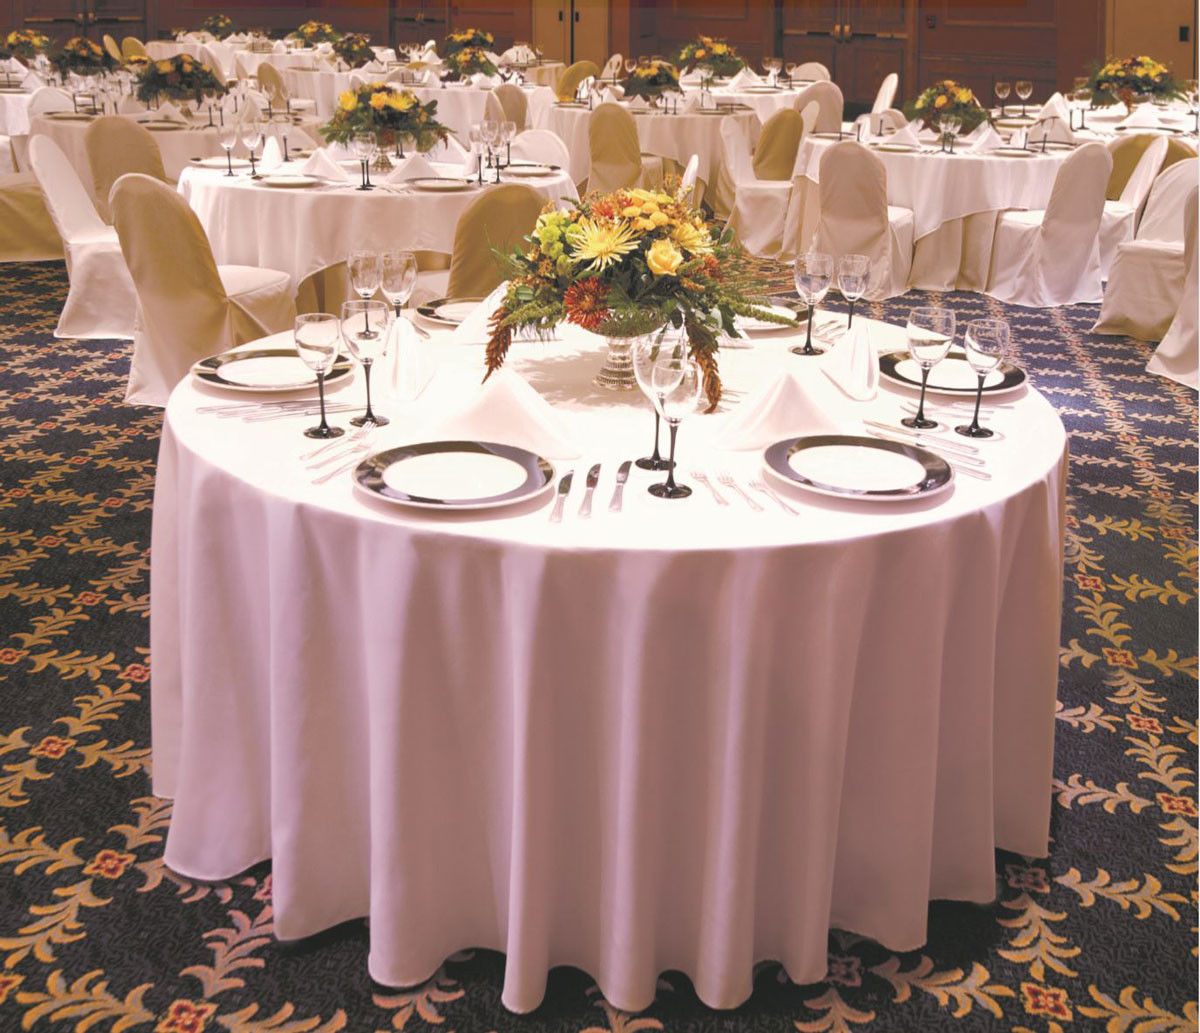 How durable and quality-rich is the 132 inch round tablecloth by Milliken Horizon?